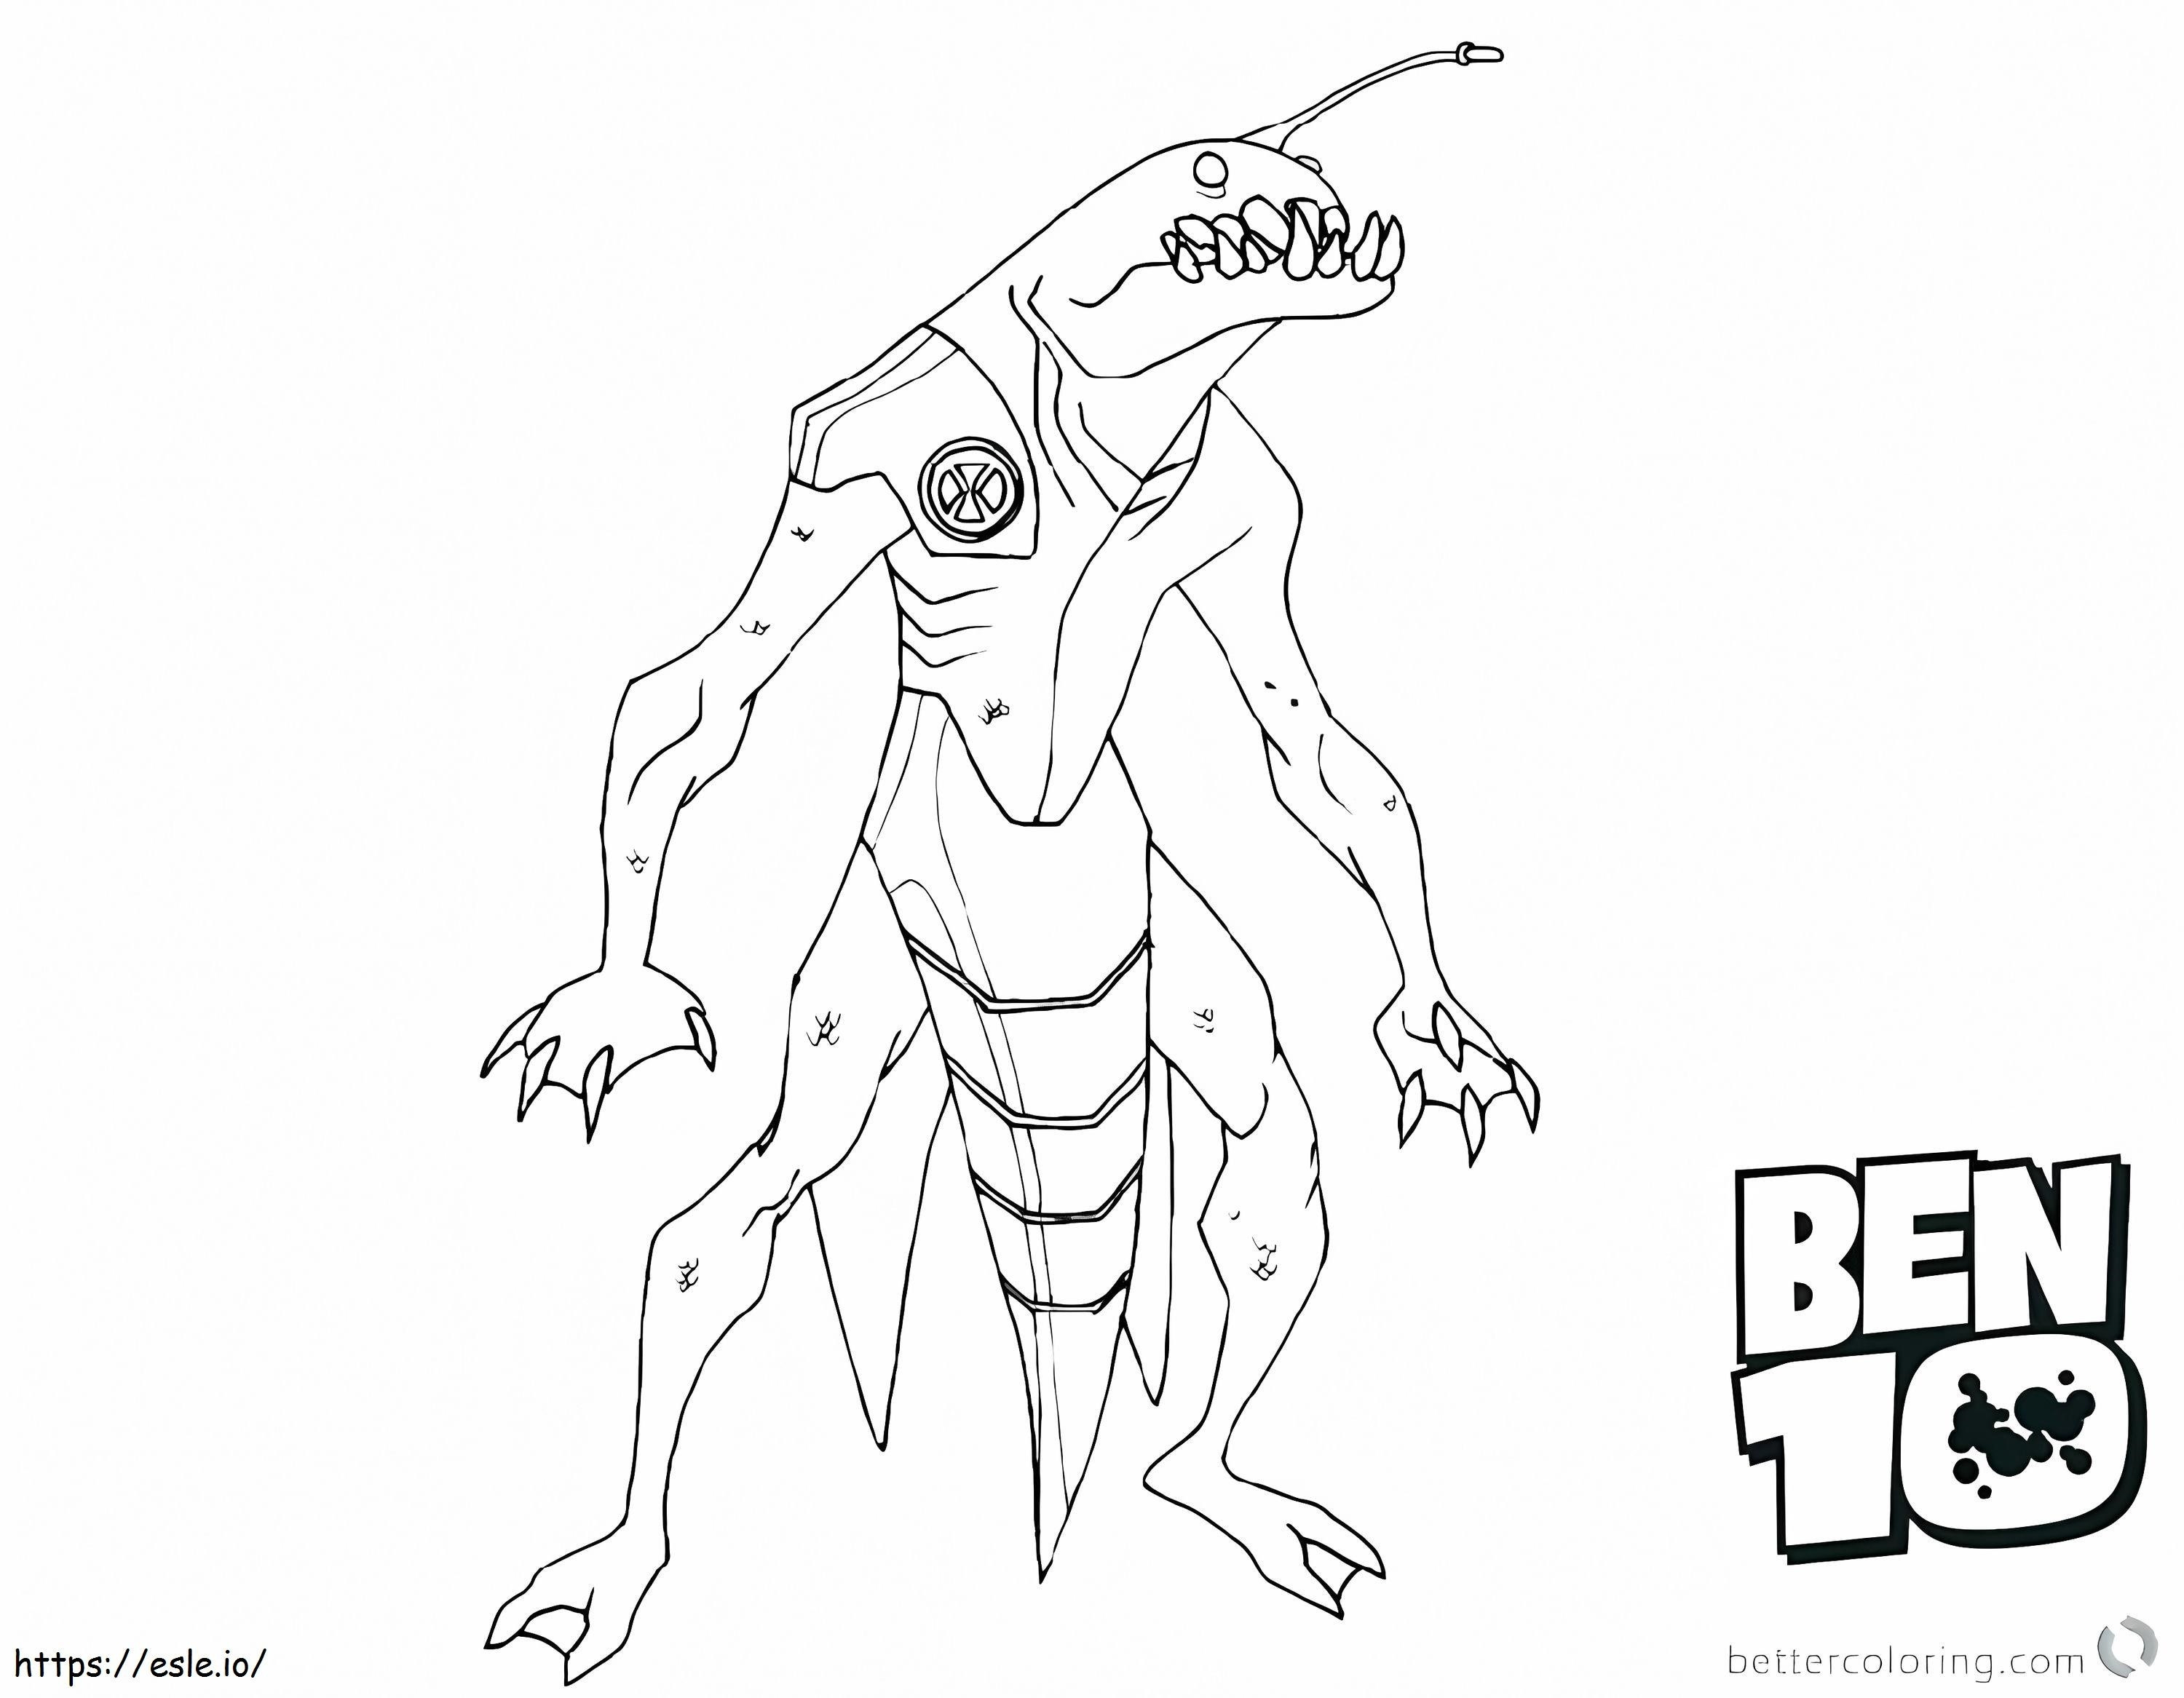 Ben 10 Cheap Coloring Sheets Printable Ben 10 Colouring Pages Games Online coloring page